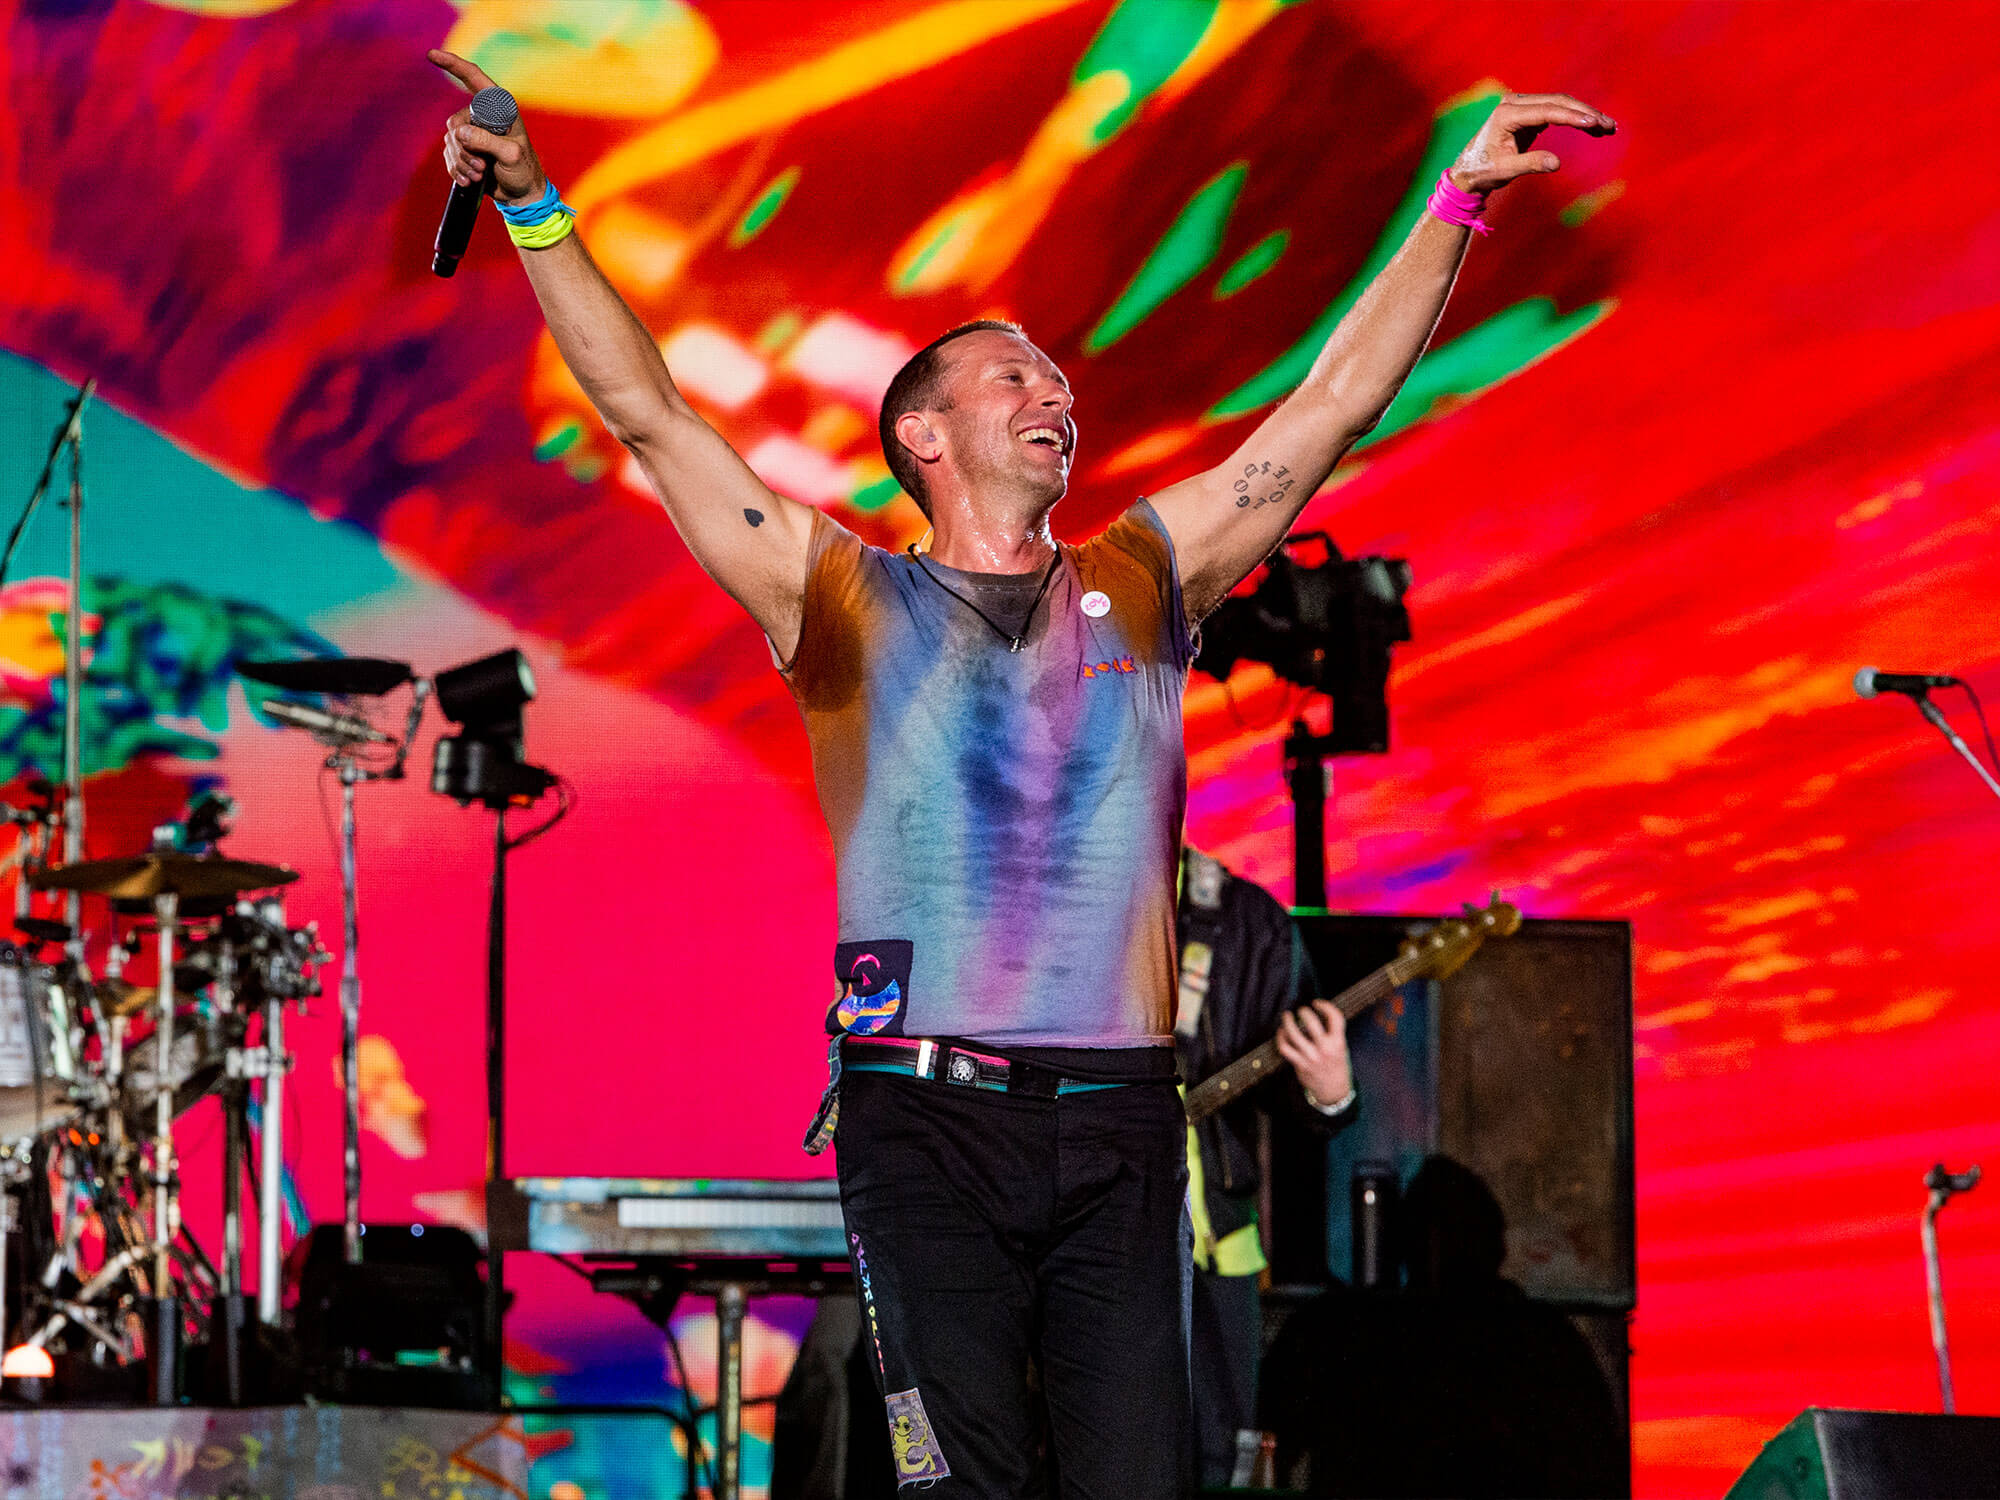 Chris Martin of Coldplay performing onstage